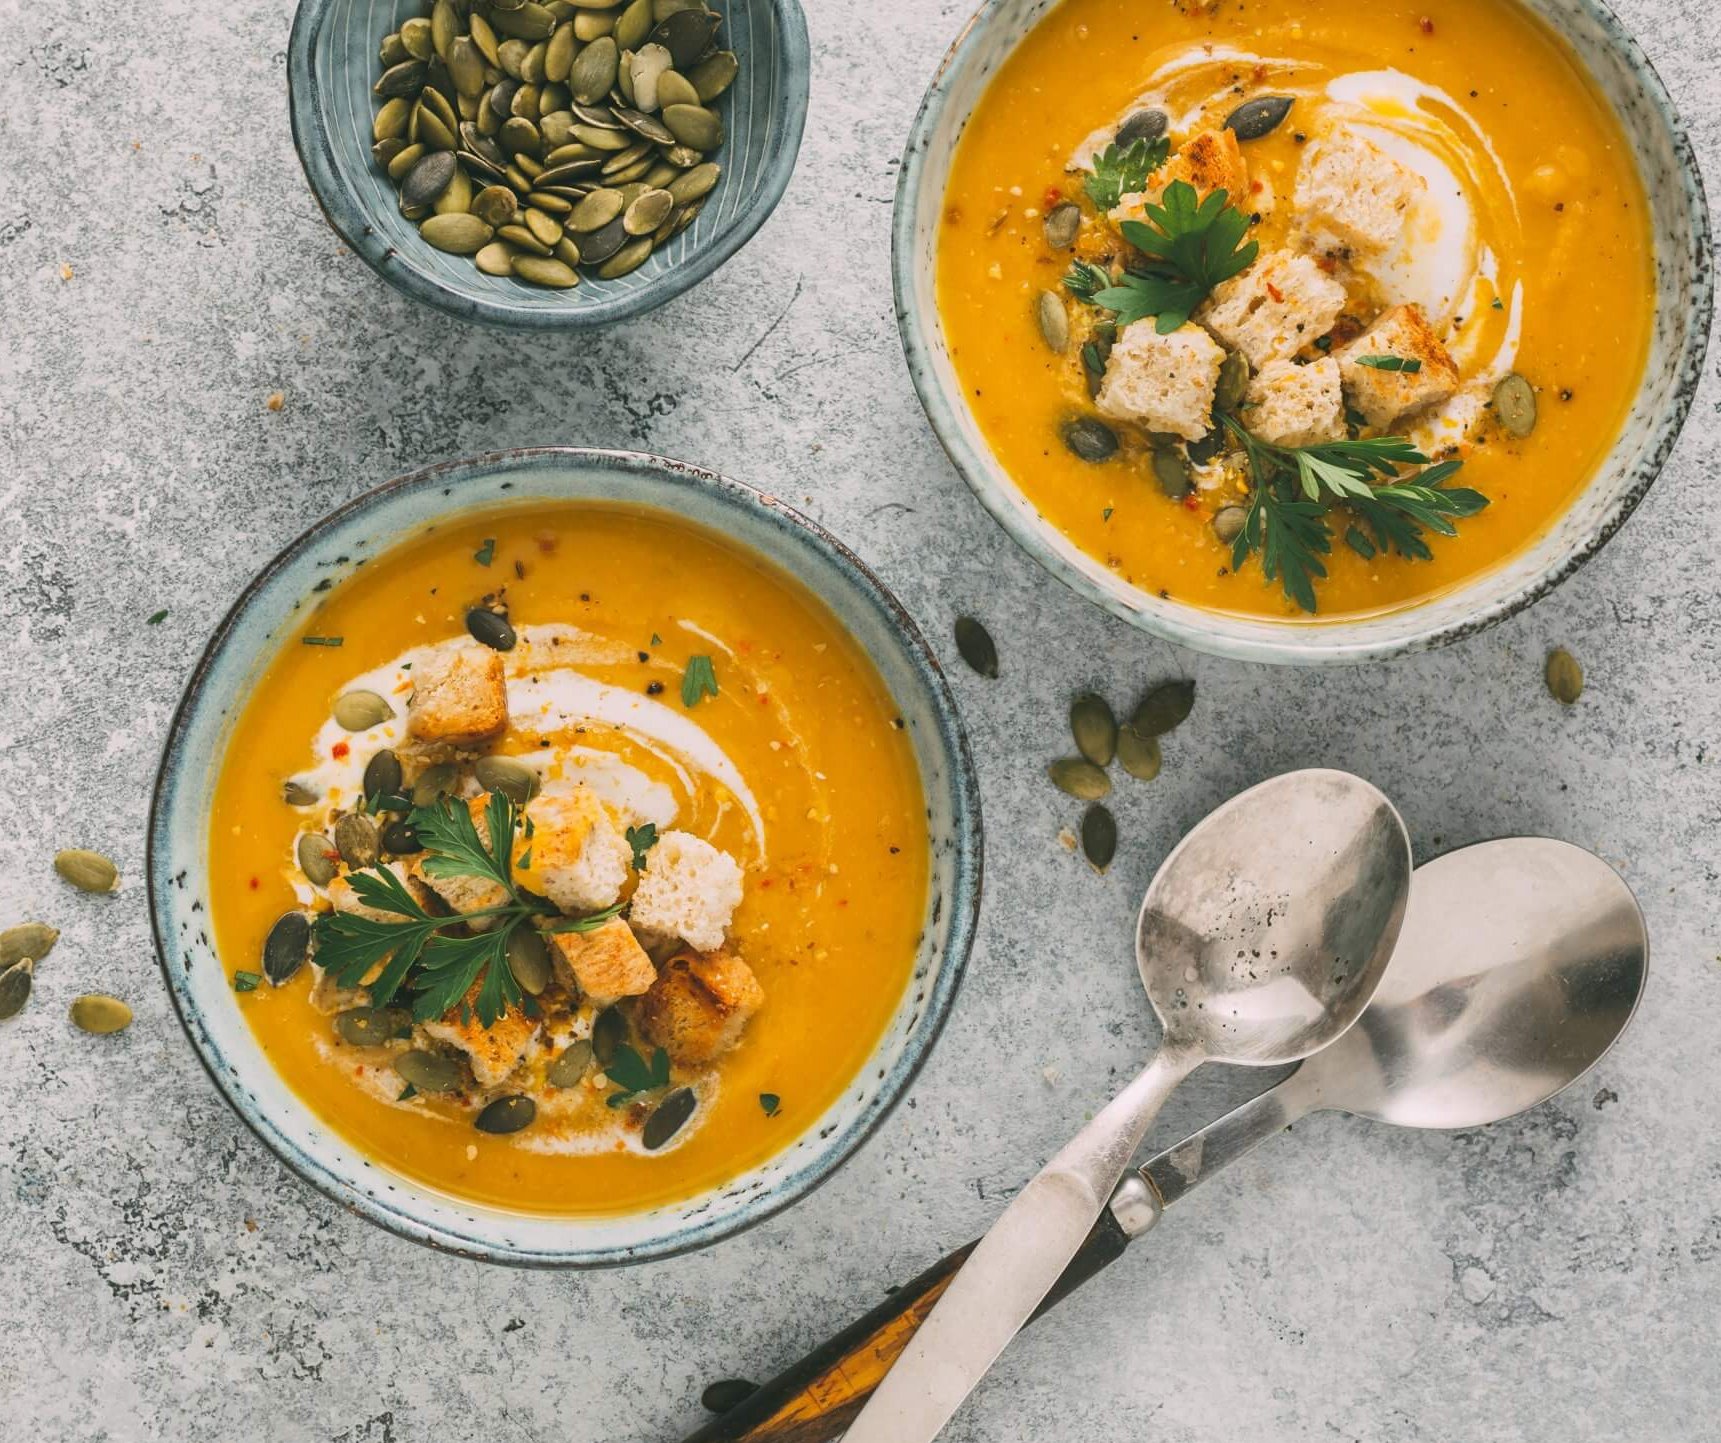 Pumpkin Soup with with croutons and pumpkin seeds, Top view.